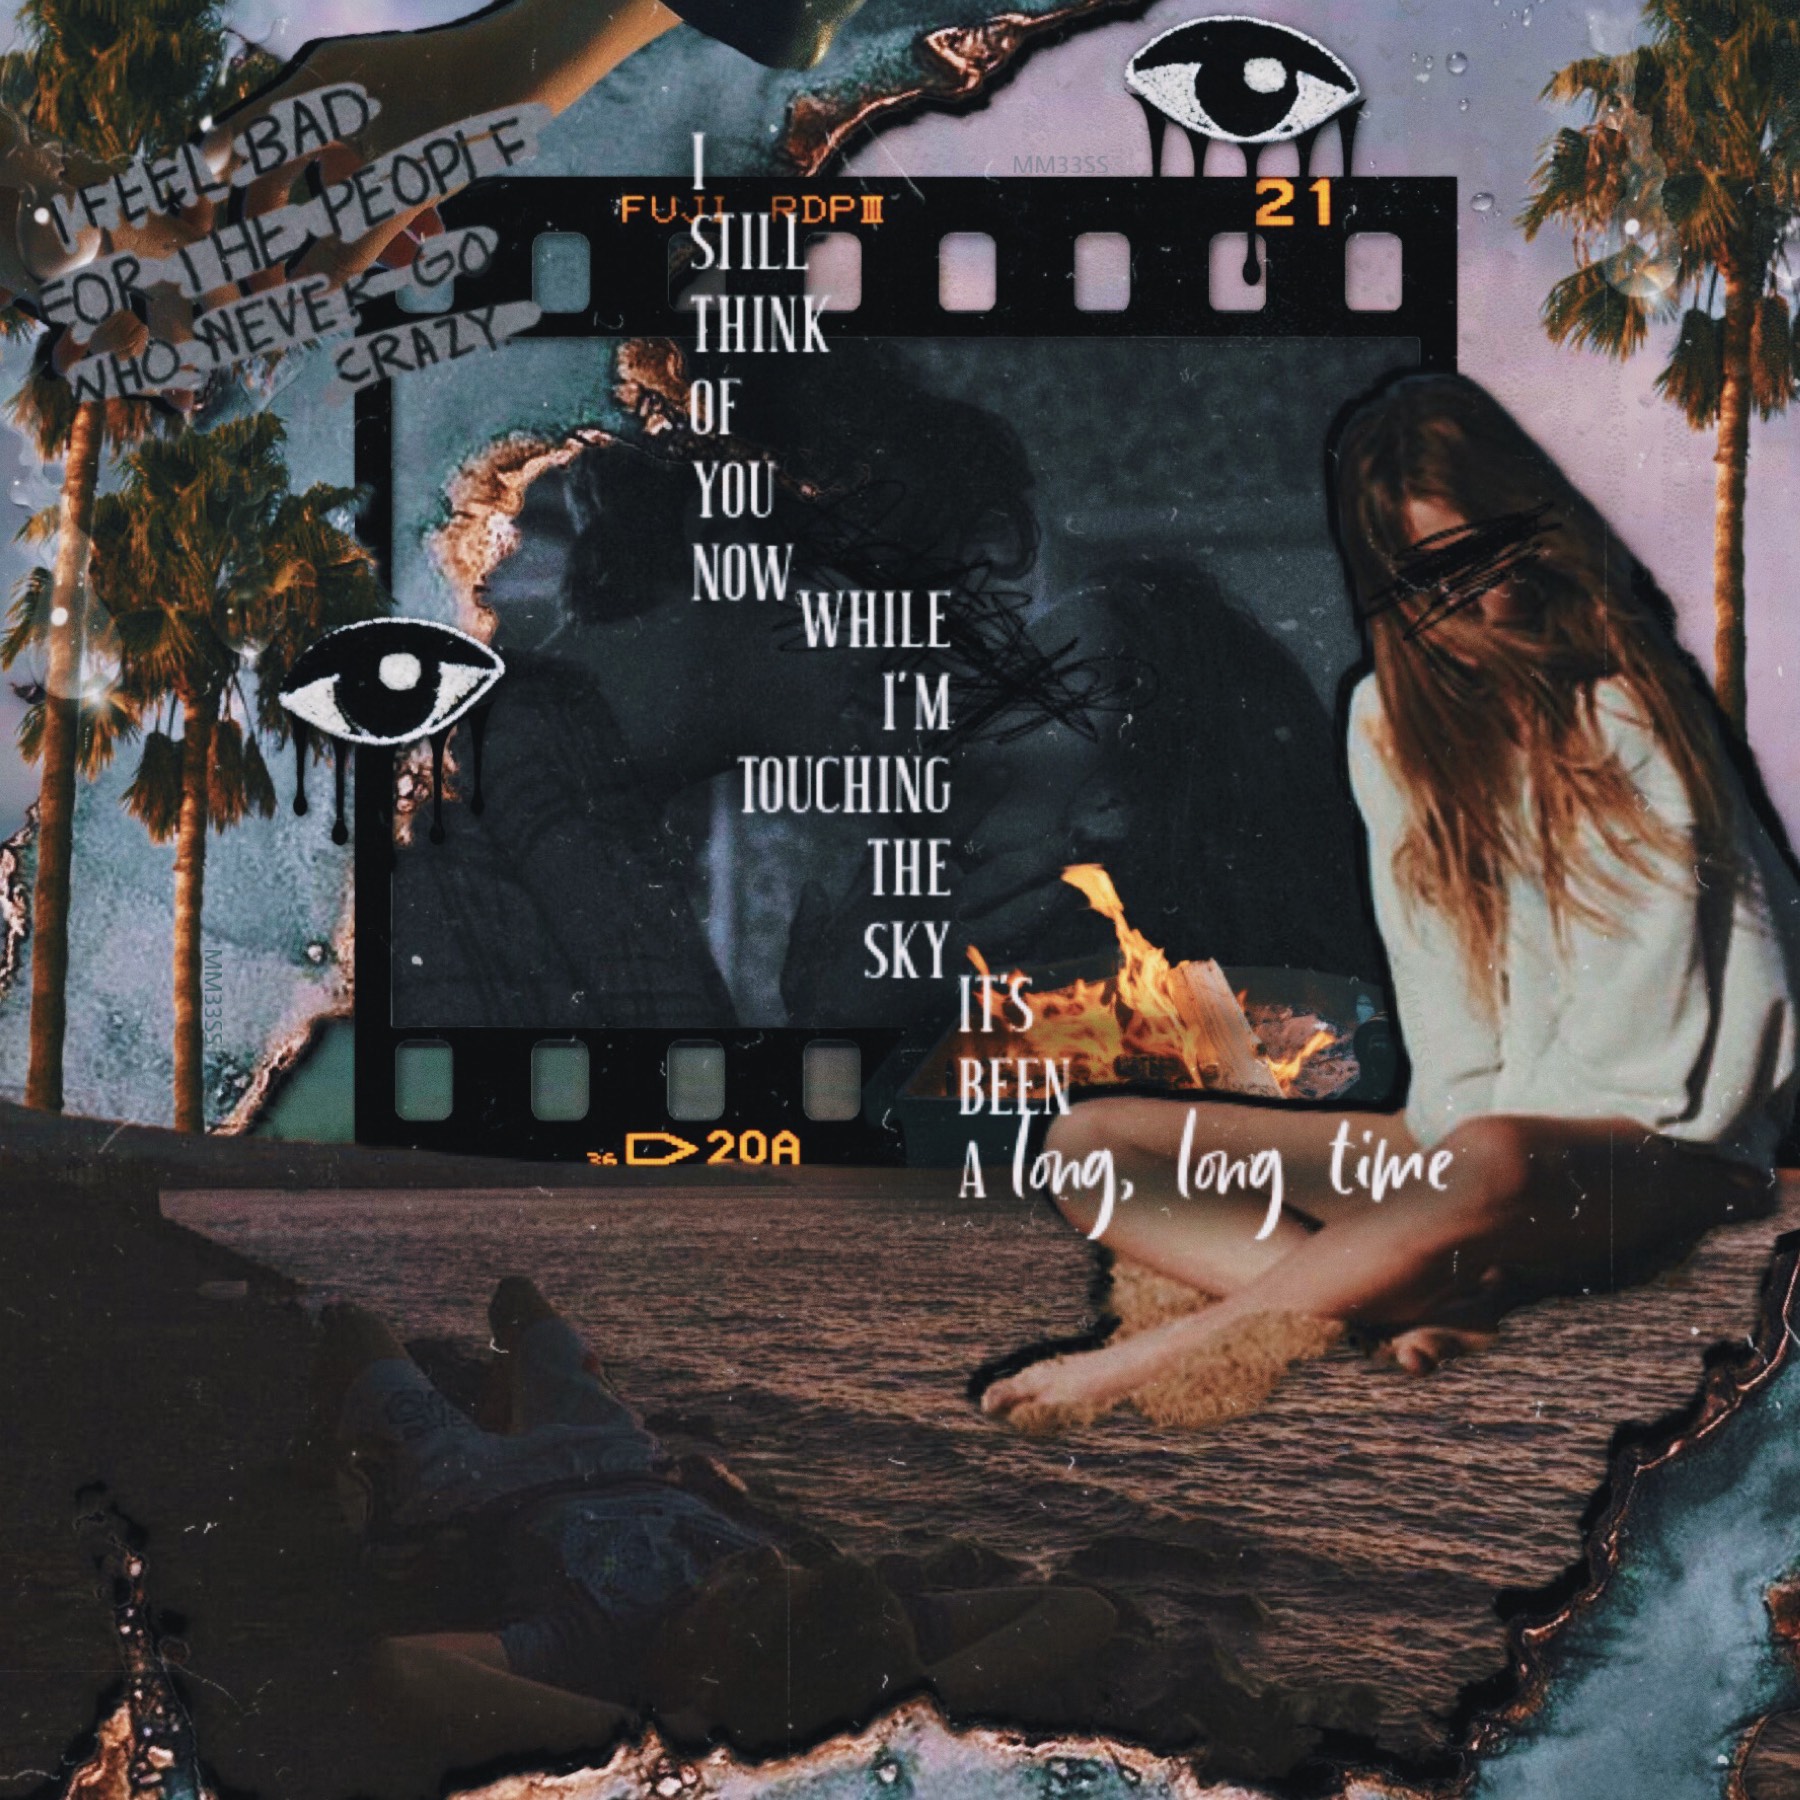 how low can you go (addal remix) / LP / Feb. 28, 2021

created for contest held by weekly-contests

i attempted a grunge-y beach! 👀